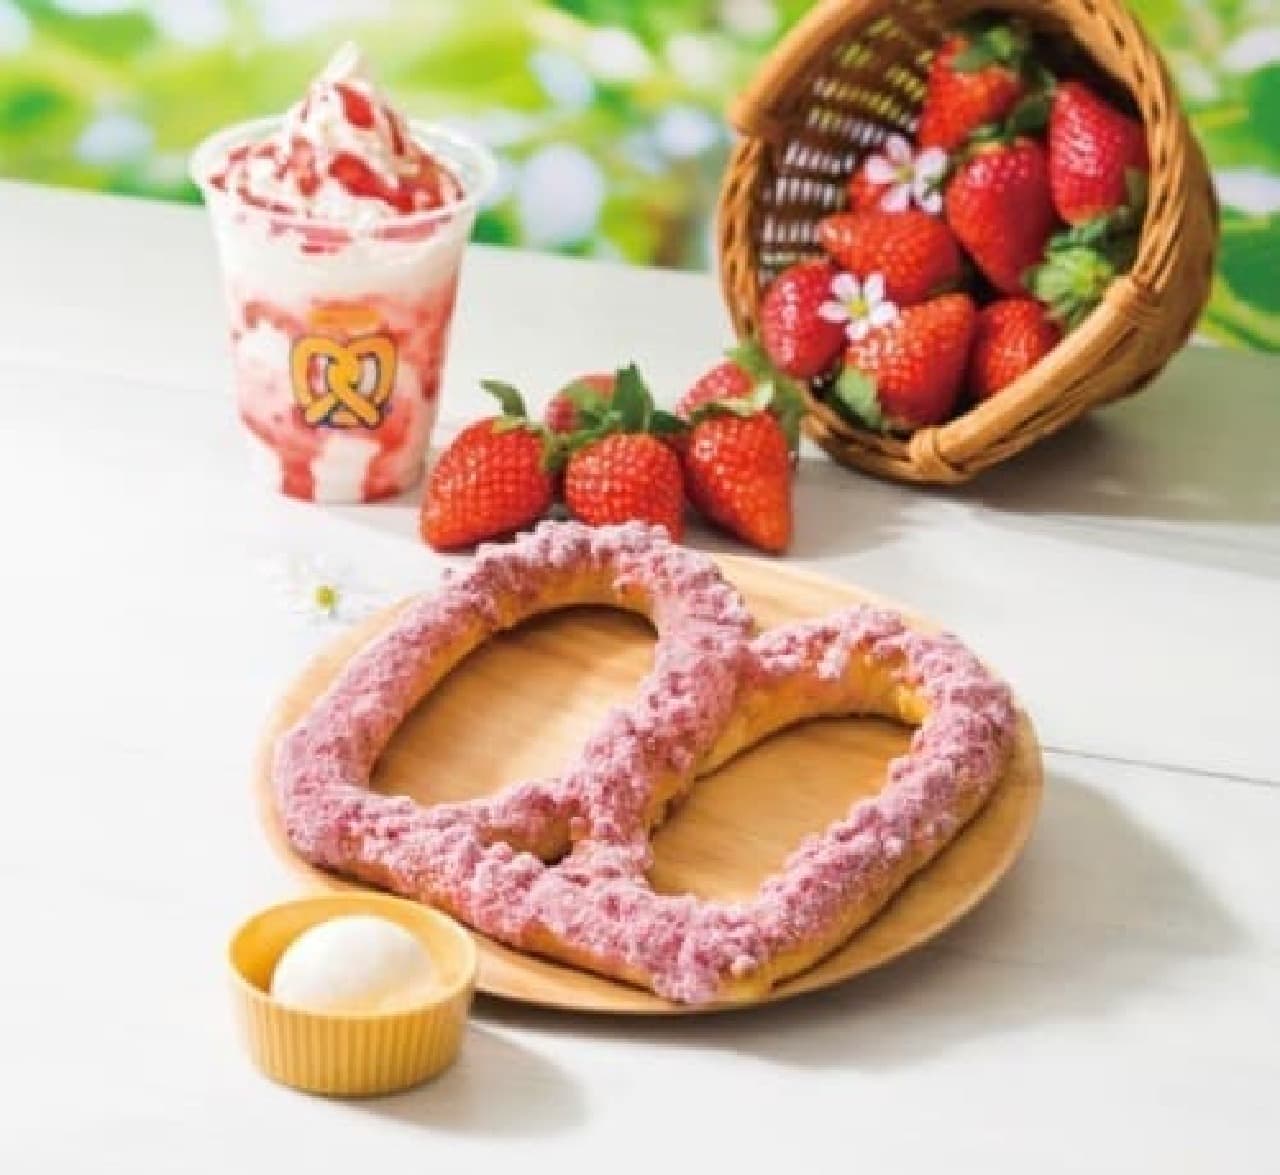 A sweet and sour taste that is perfect for spring! (Foreground is Tochiotome condensed milk pretzel)